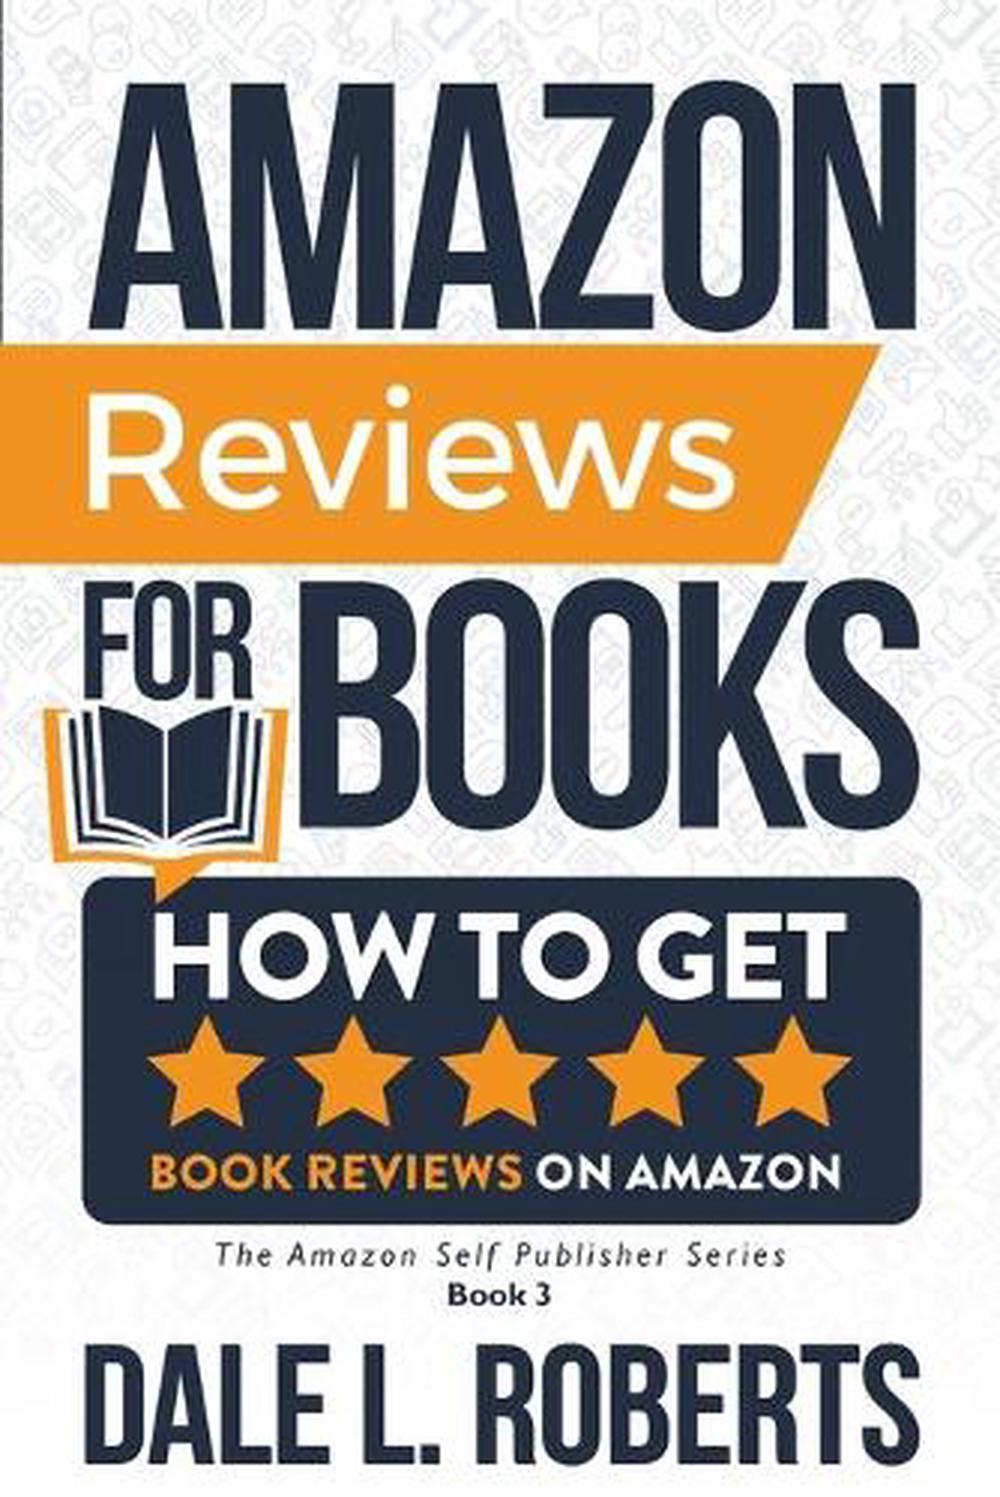 amazon-reviews-for-books-how-to-get-book-reviews-on-amazon-by-dale-l